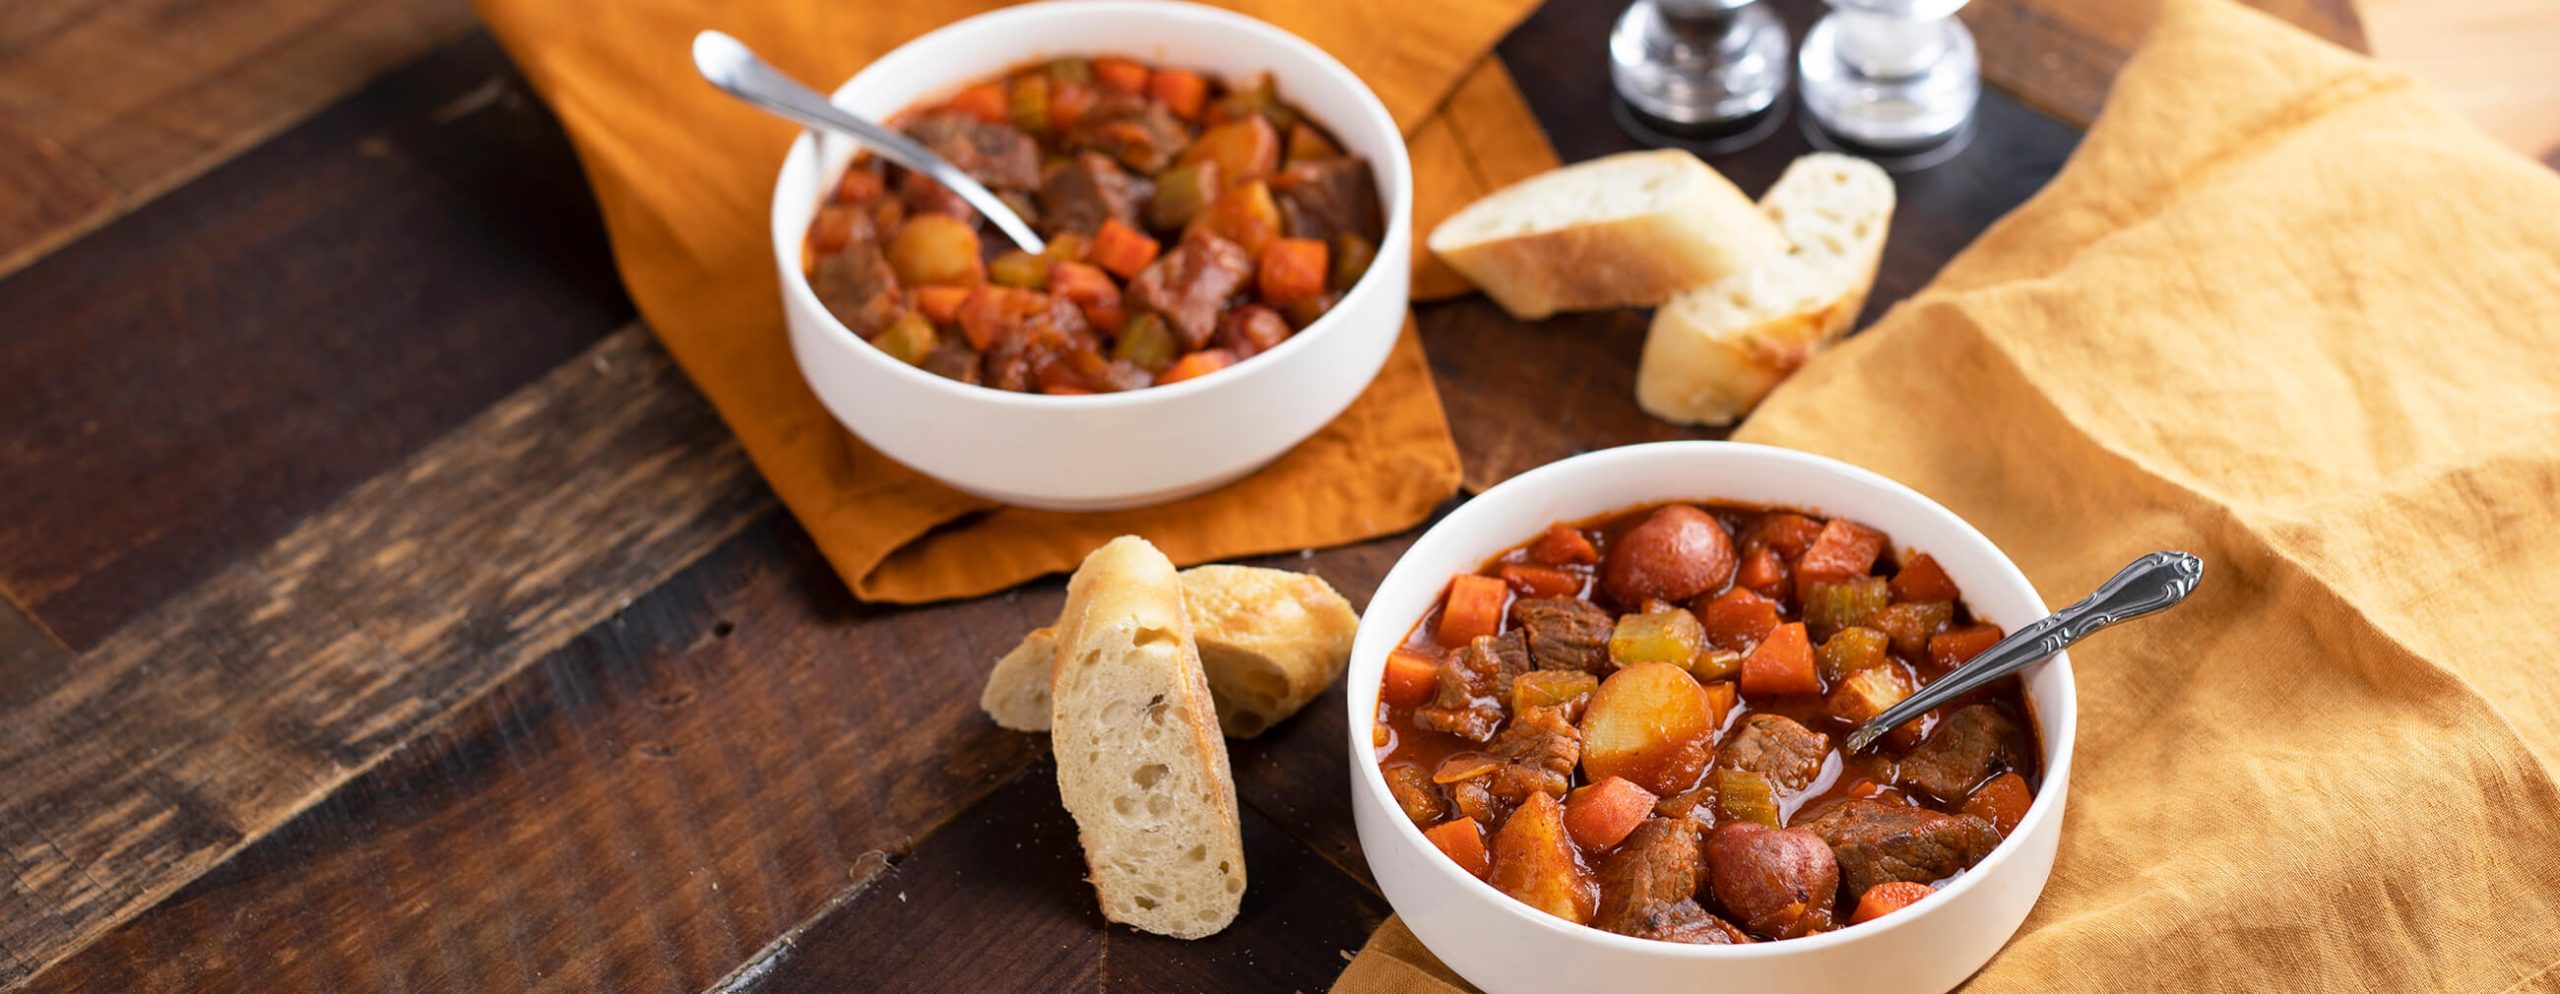 Easy Homemade Beef Stew Recipe Details